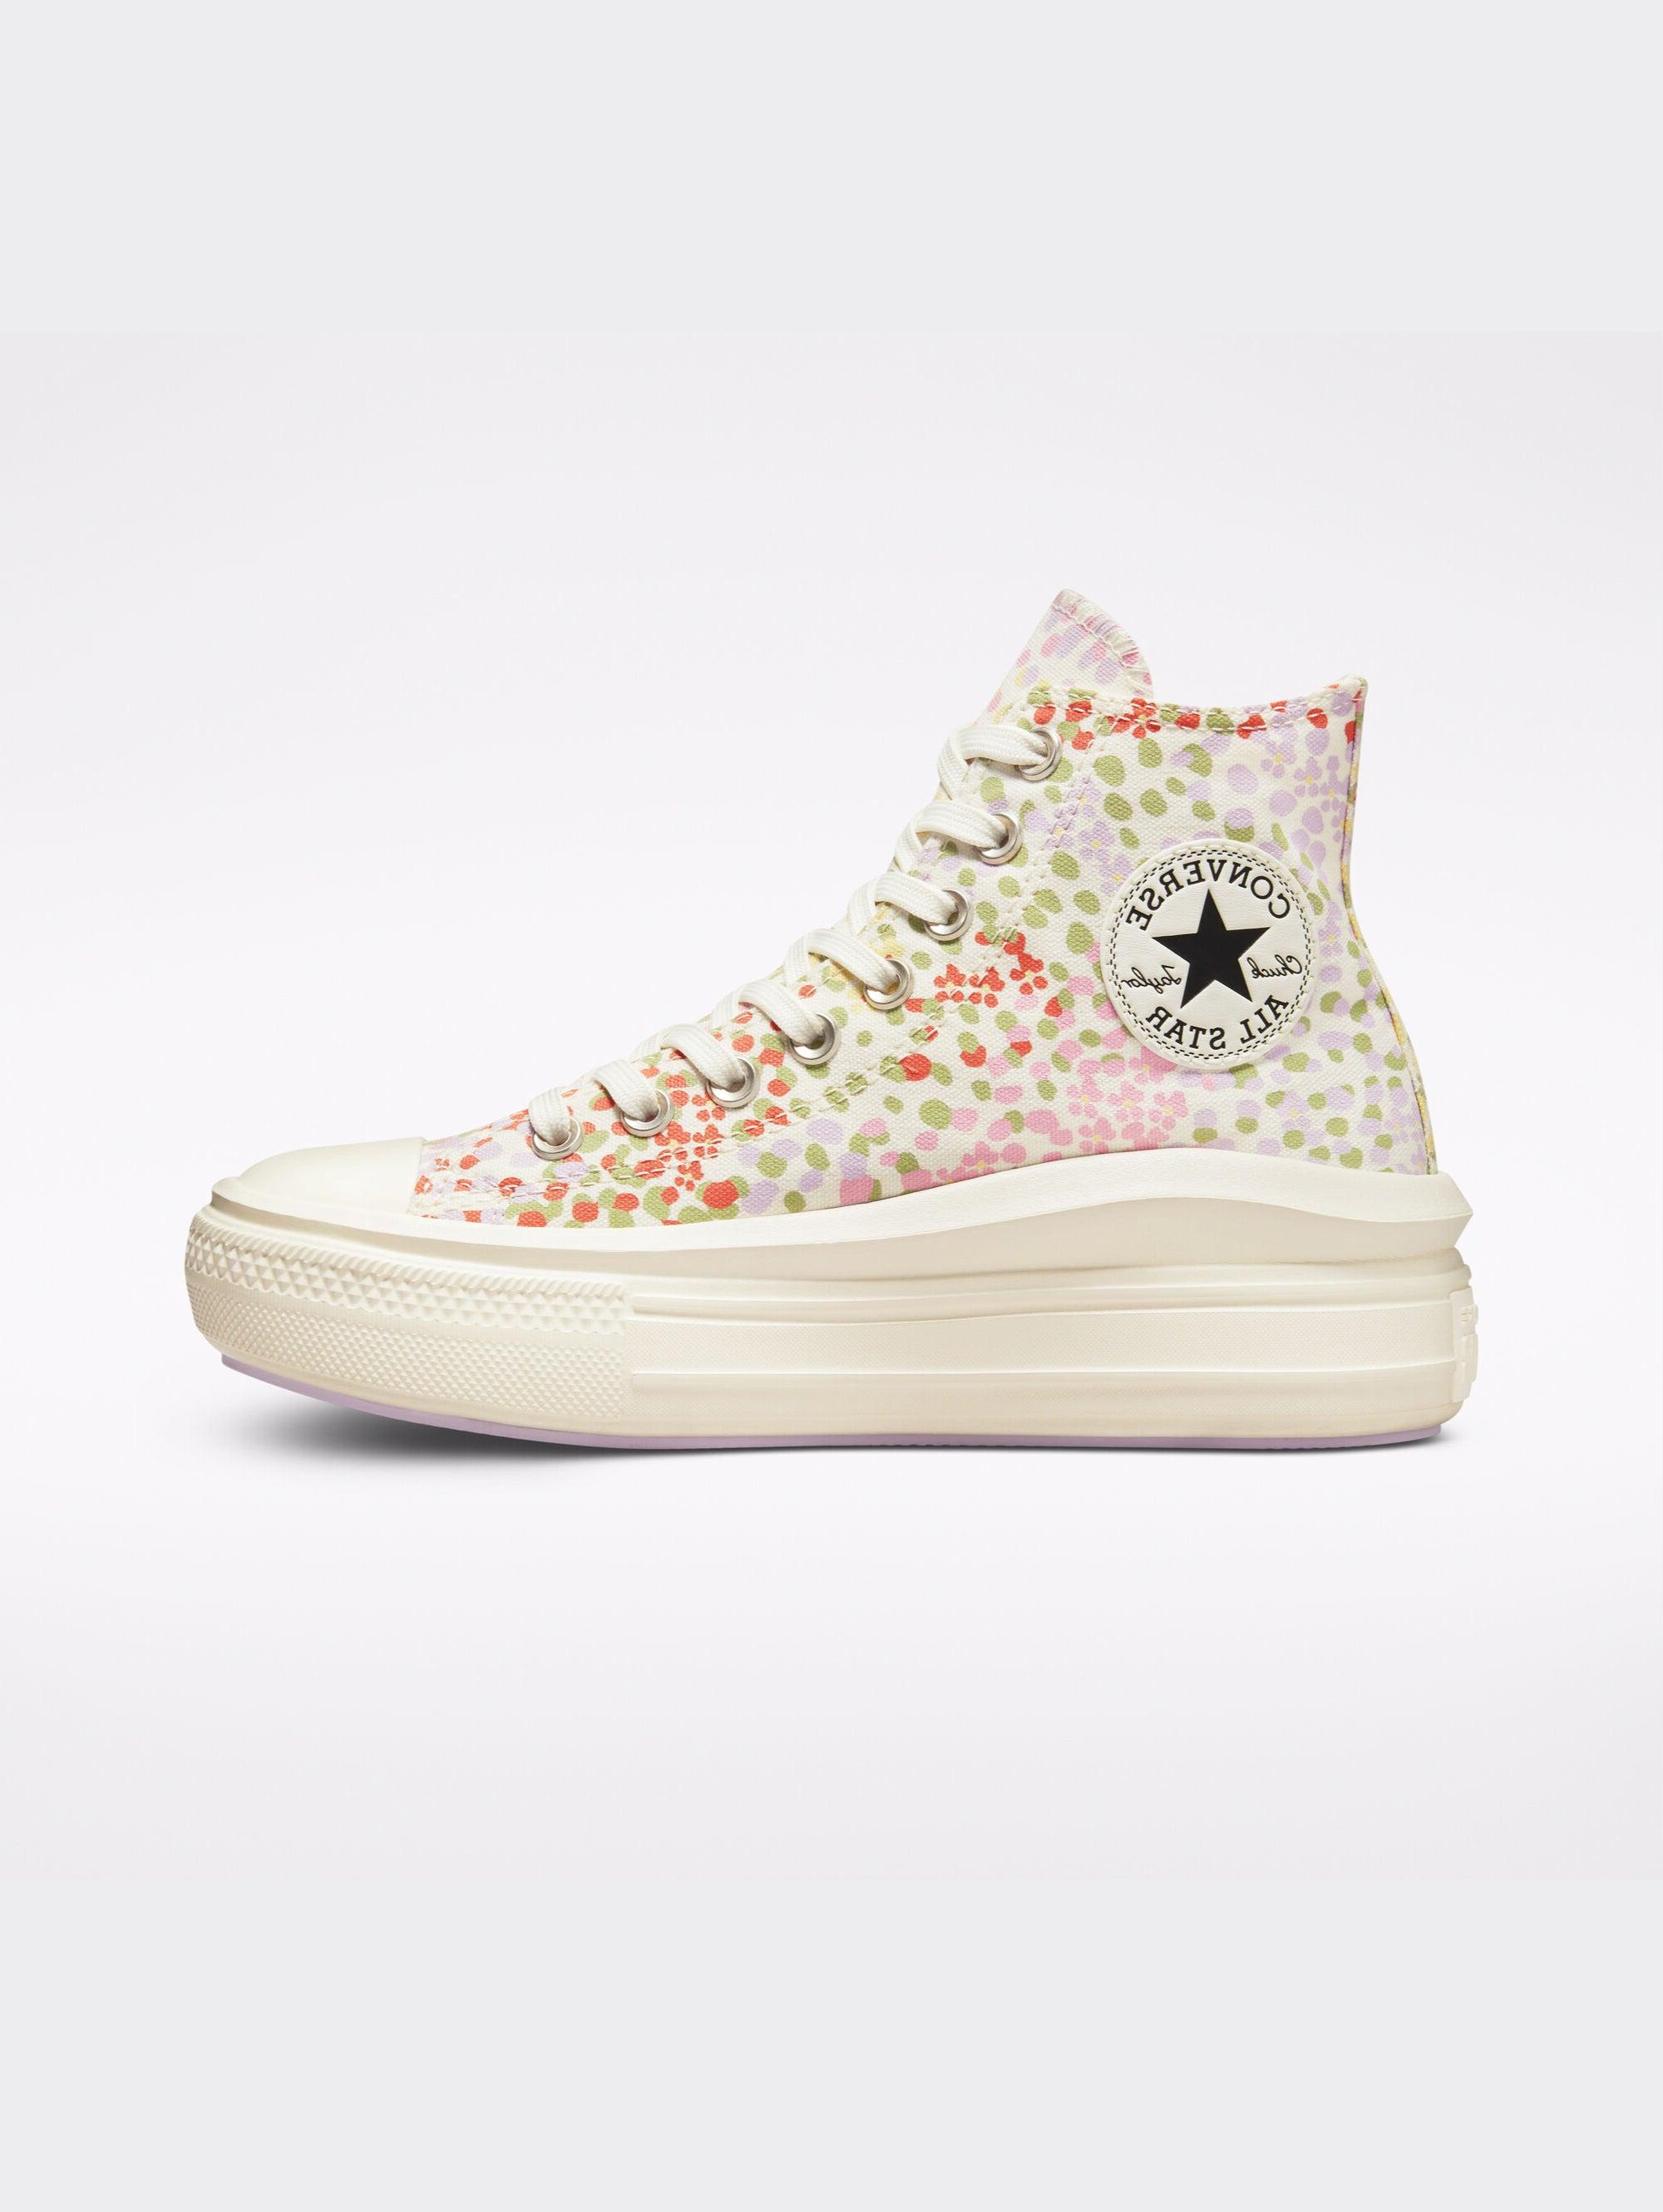 Converse Platform Sneakers With Flowers And Multicolor Polka Dots | Lyst